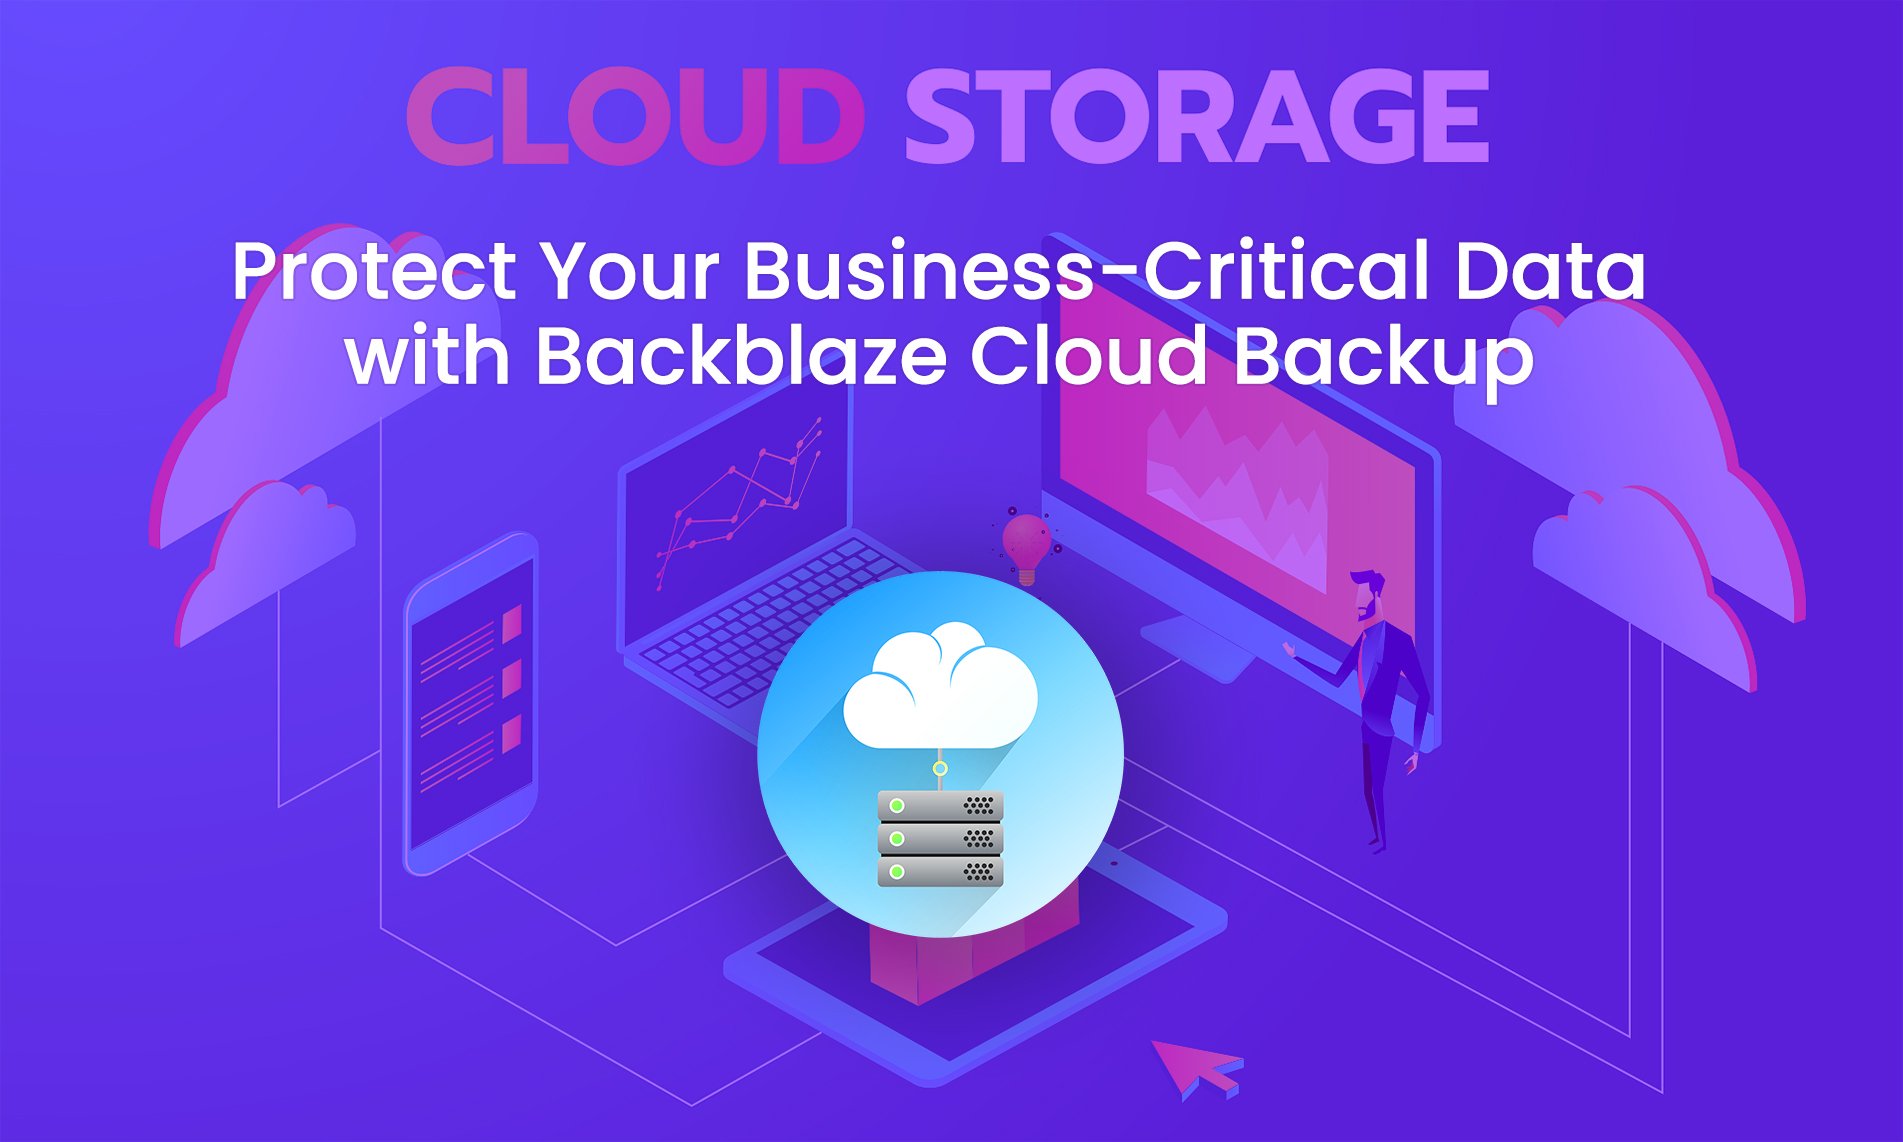 Protect Your Business-Critical Data With Backblaze Cloud Backup